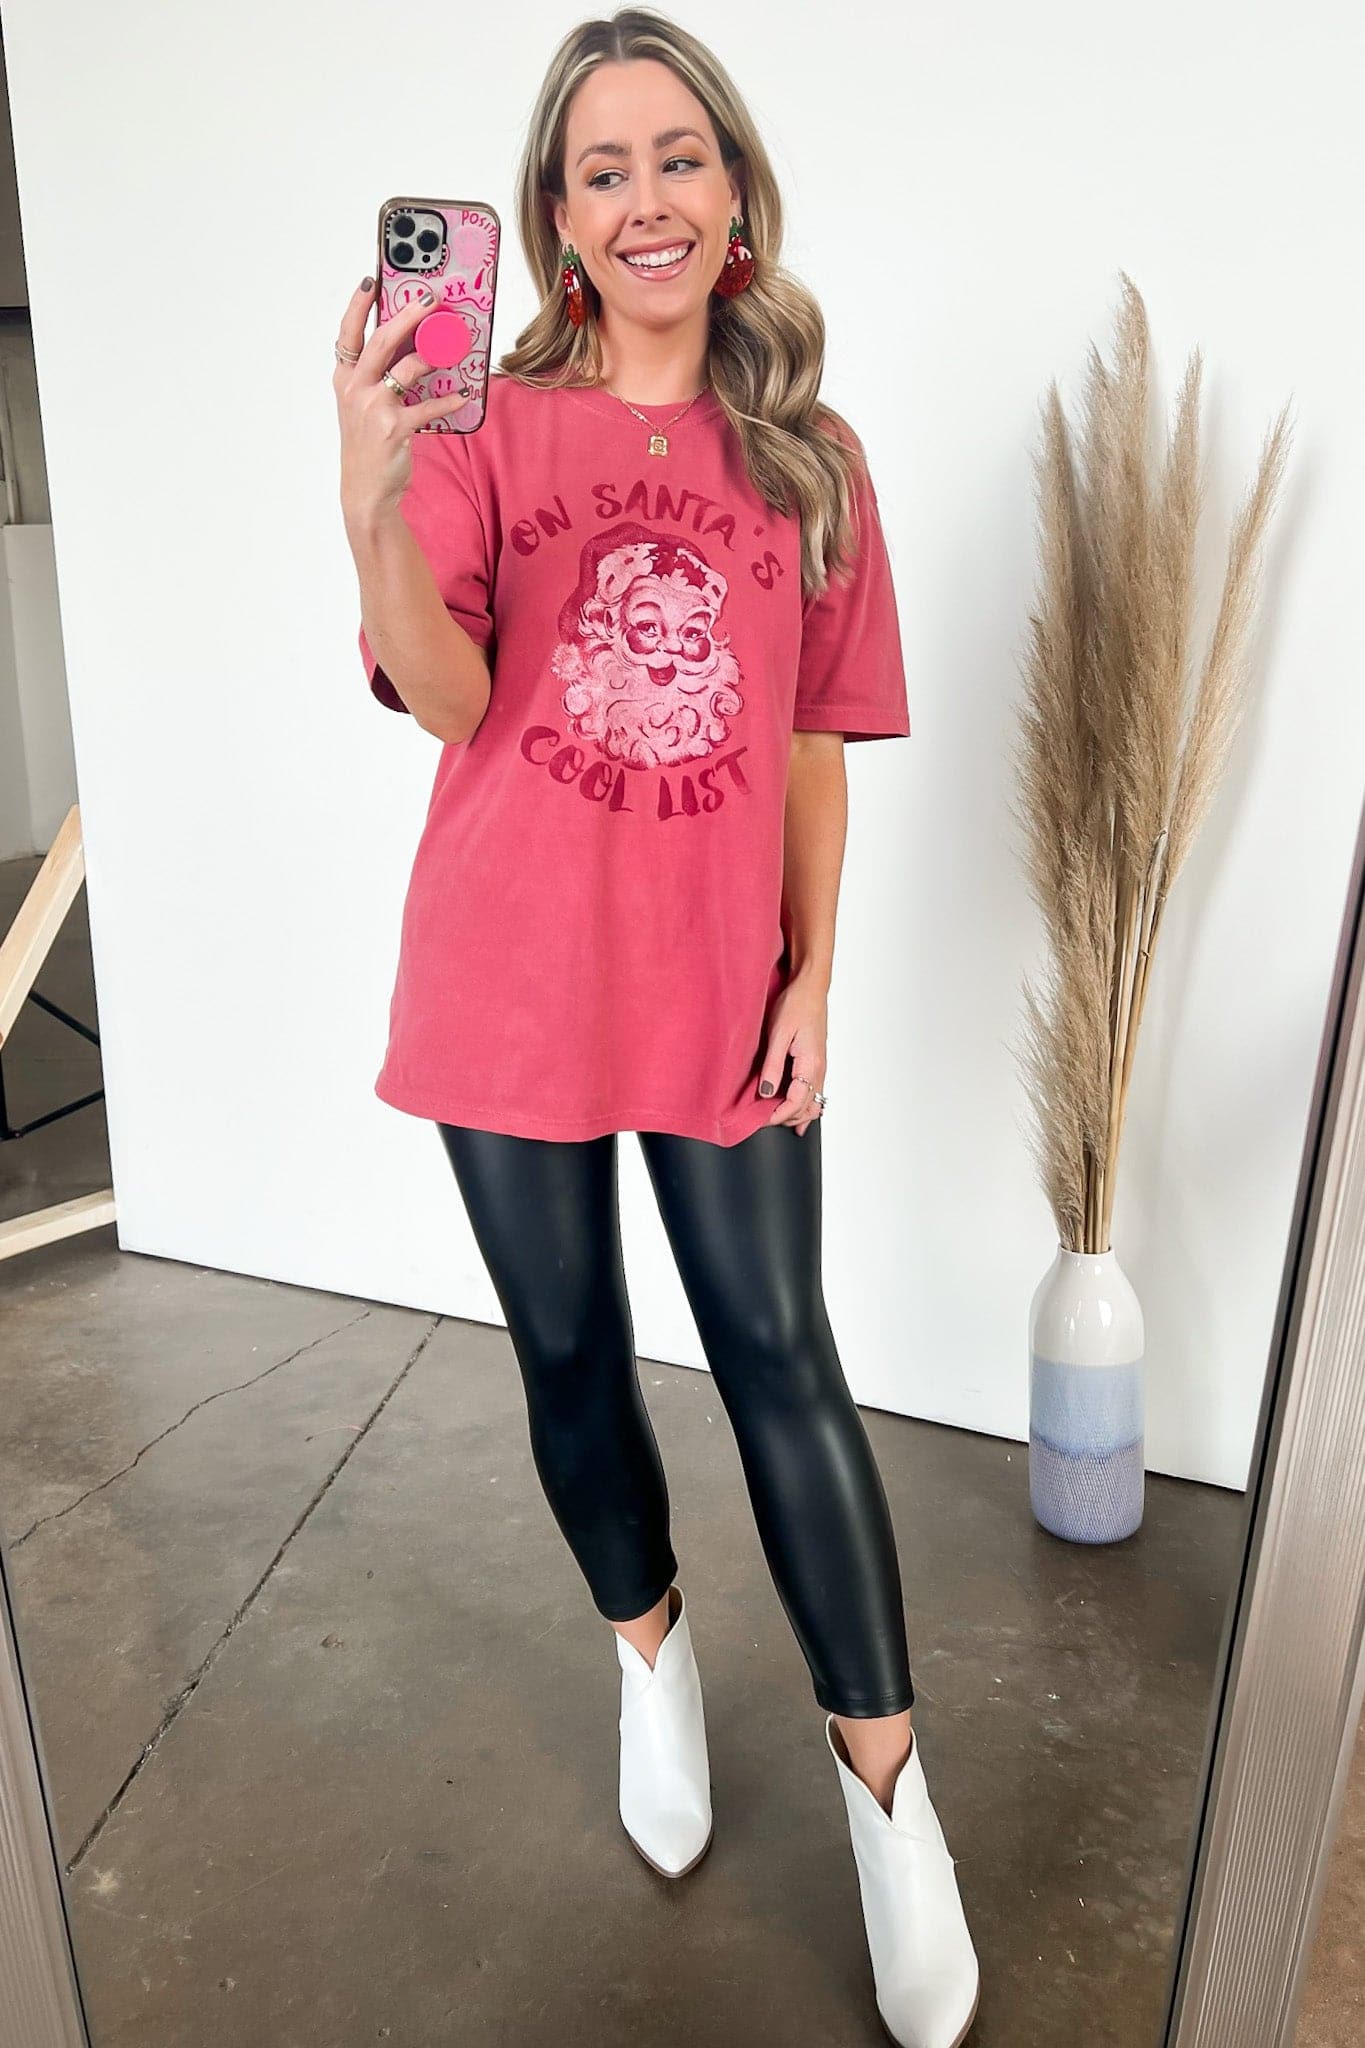  On Santa's Cool List Graphic Tee - FINAL SALE - Madison and Mallory